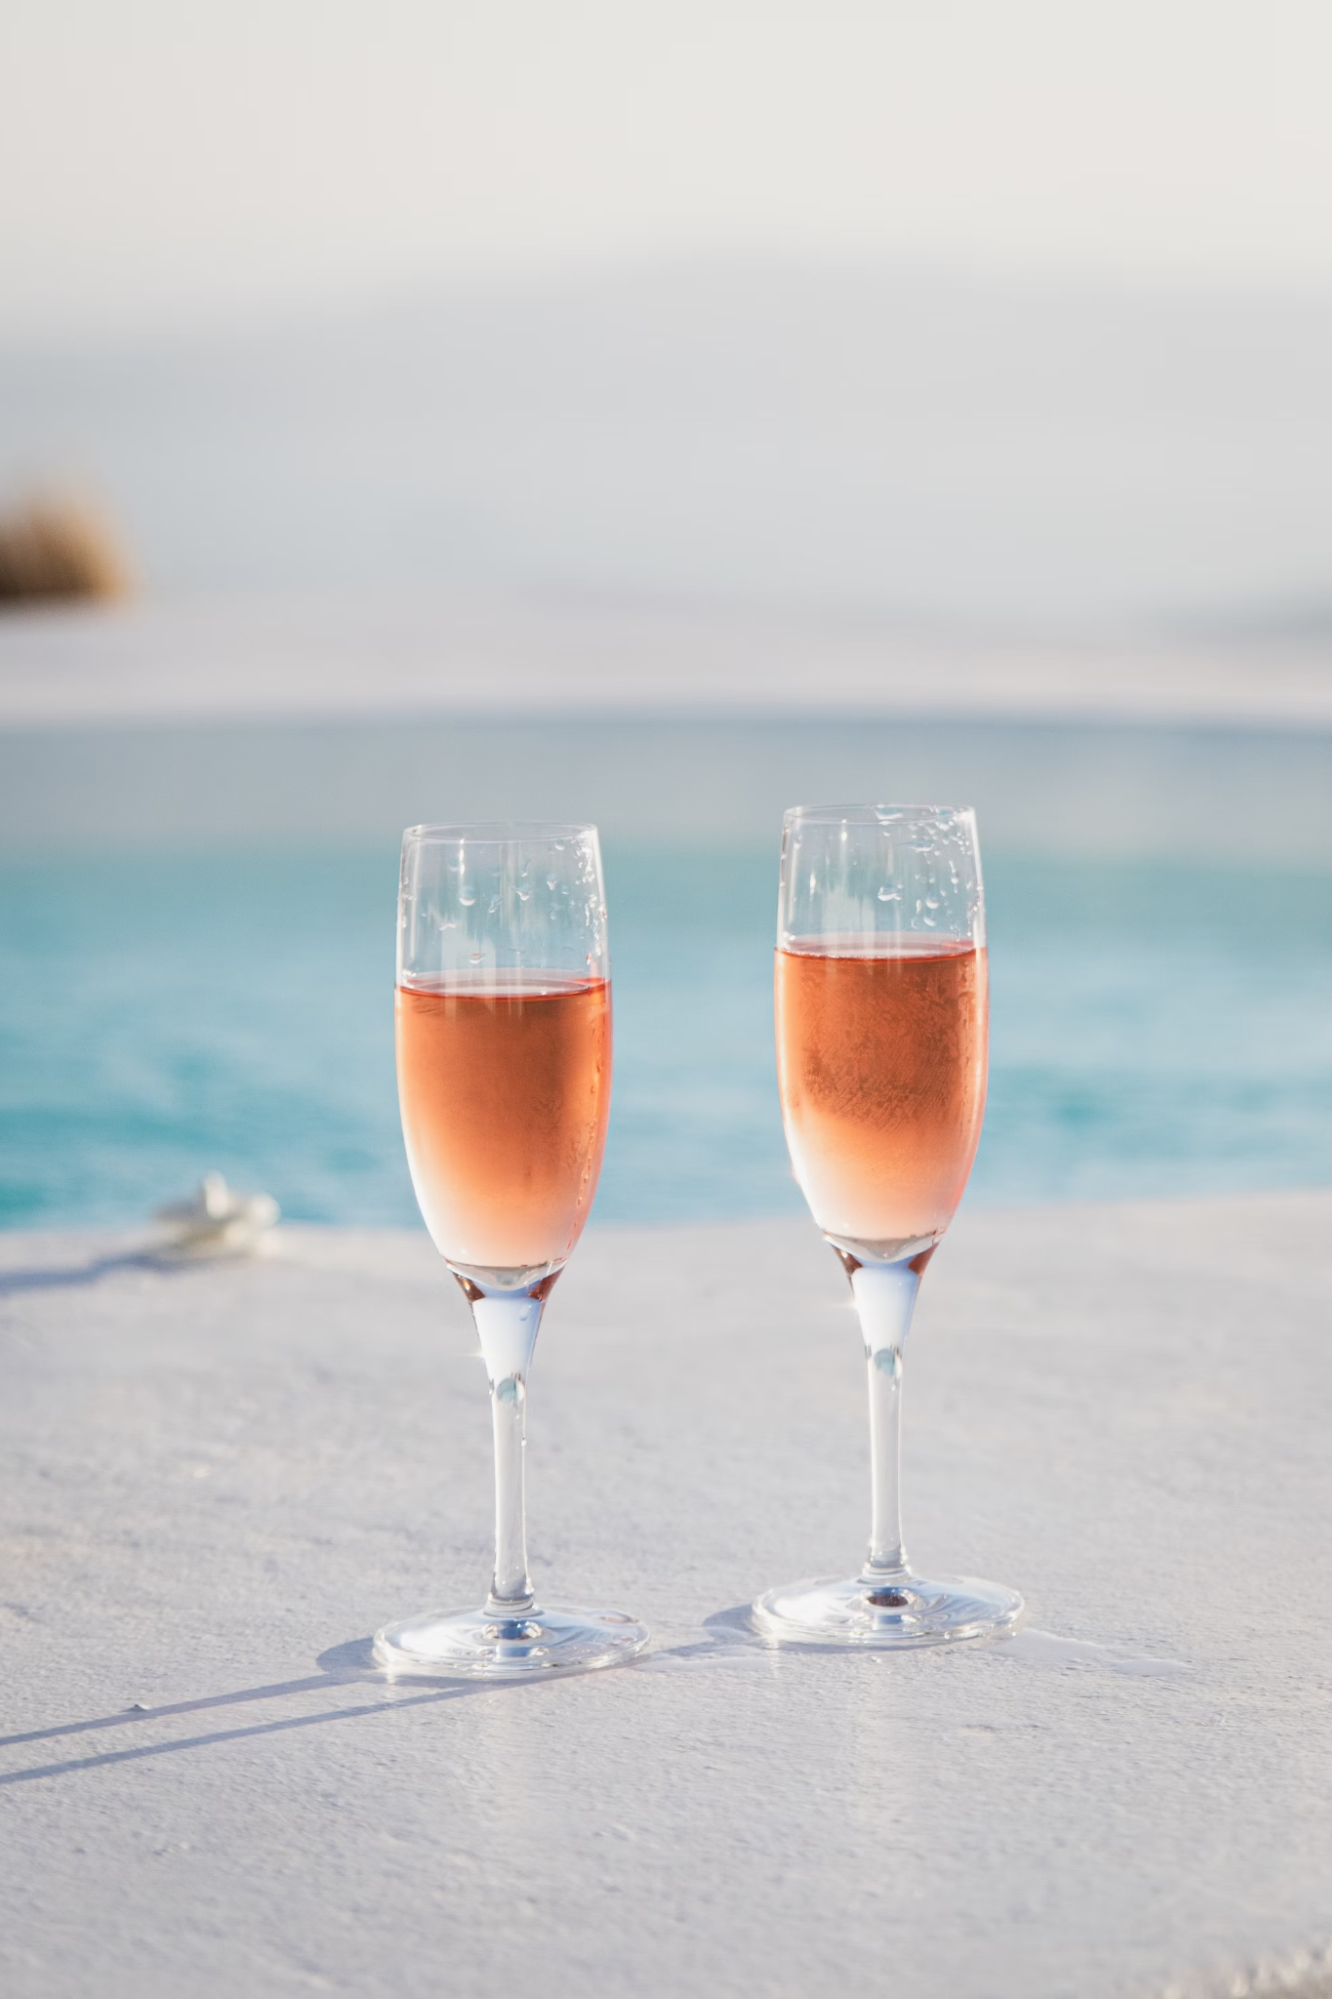 4 European rosé wines to try this summer